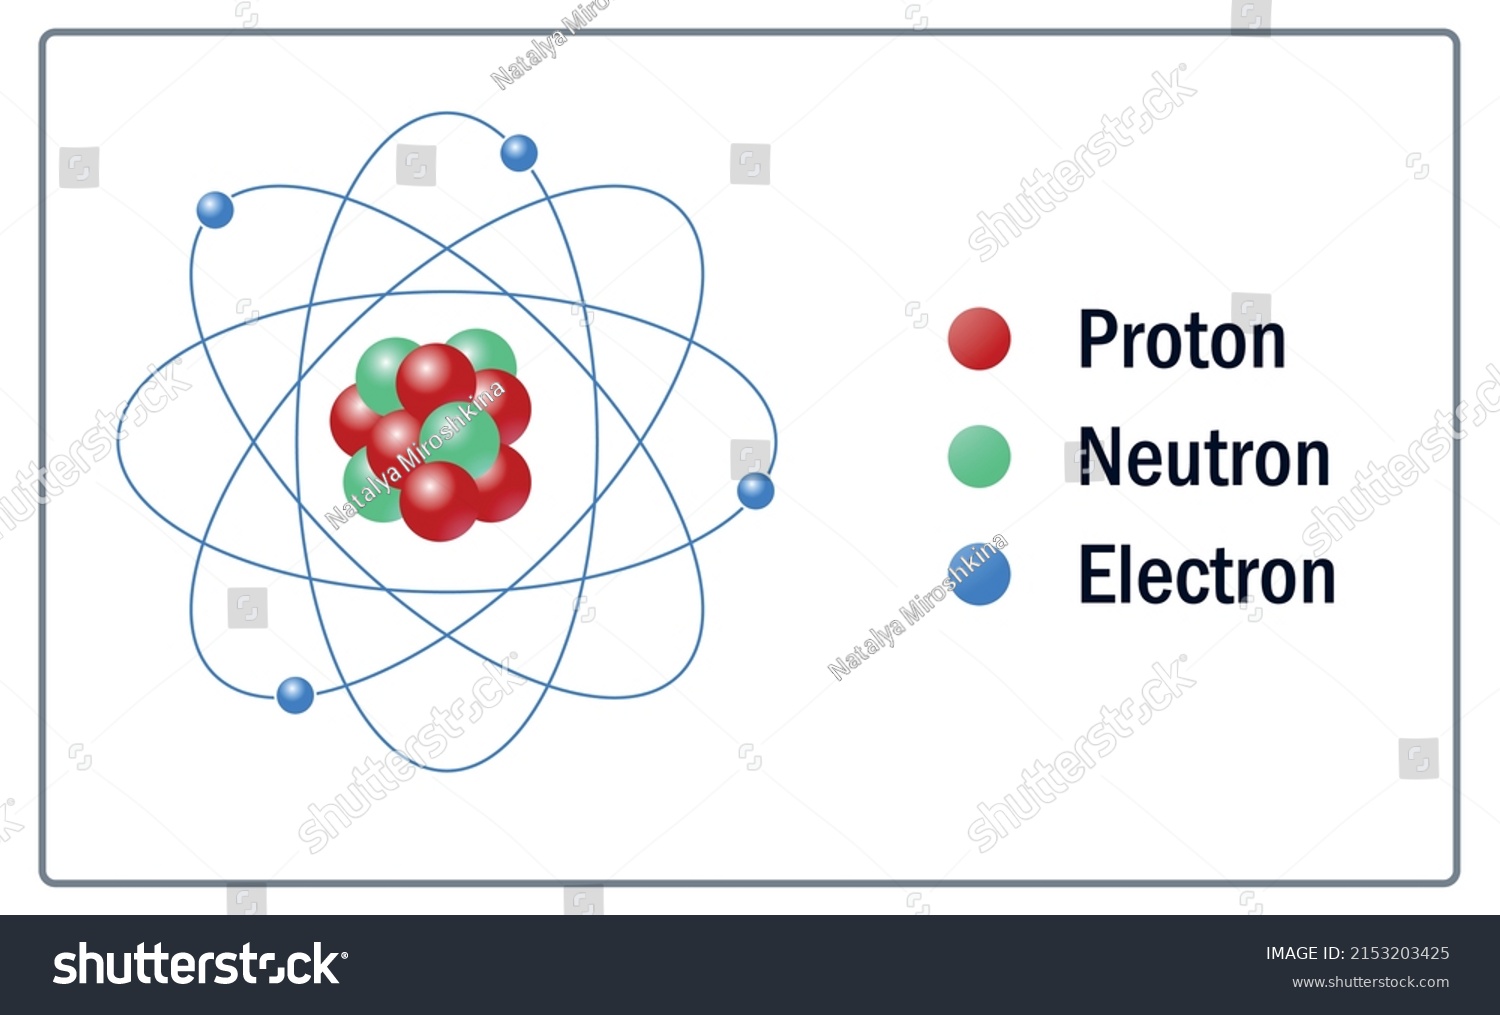 Atom Icon Atom Structure Vector Graphics Stock Vector (Royalty Free ...